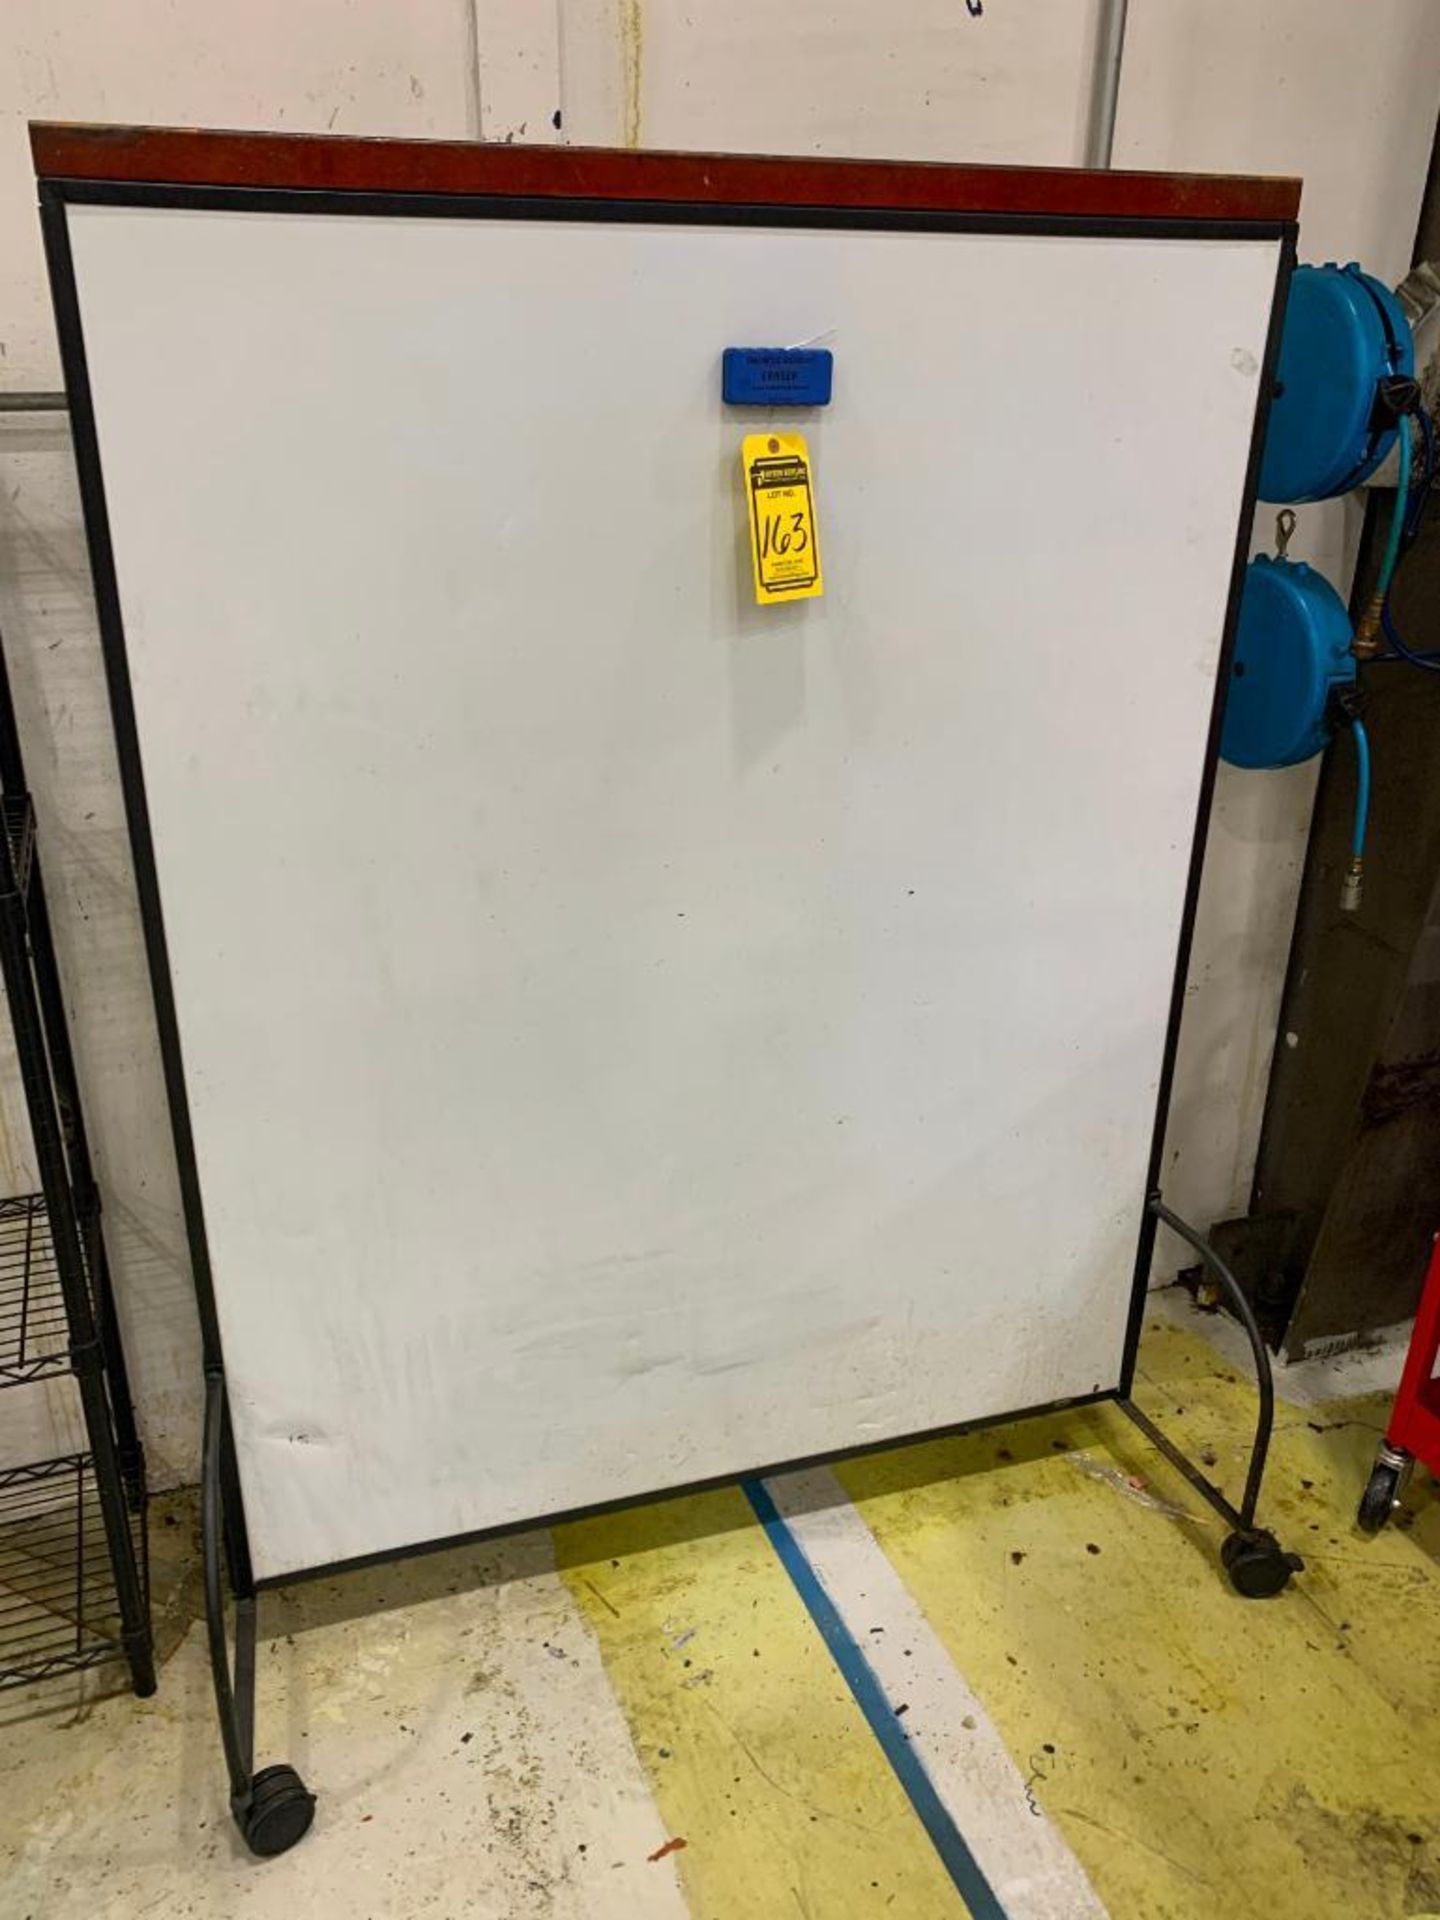 40" X 48" HD TABLE, WIRE RACK, DRY ERASE BOARD - Image 2 of 2